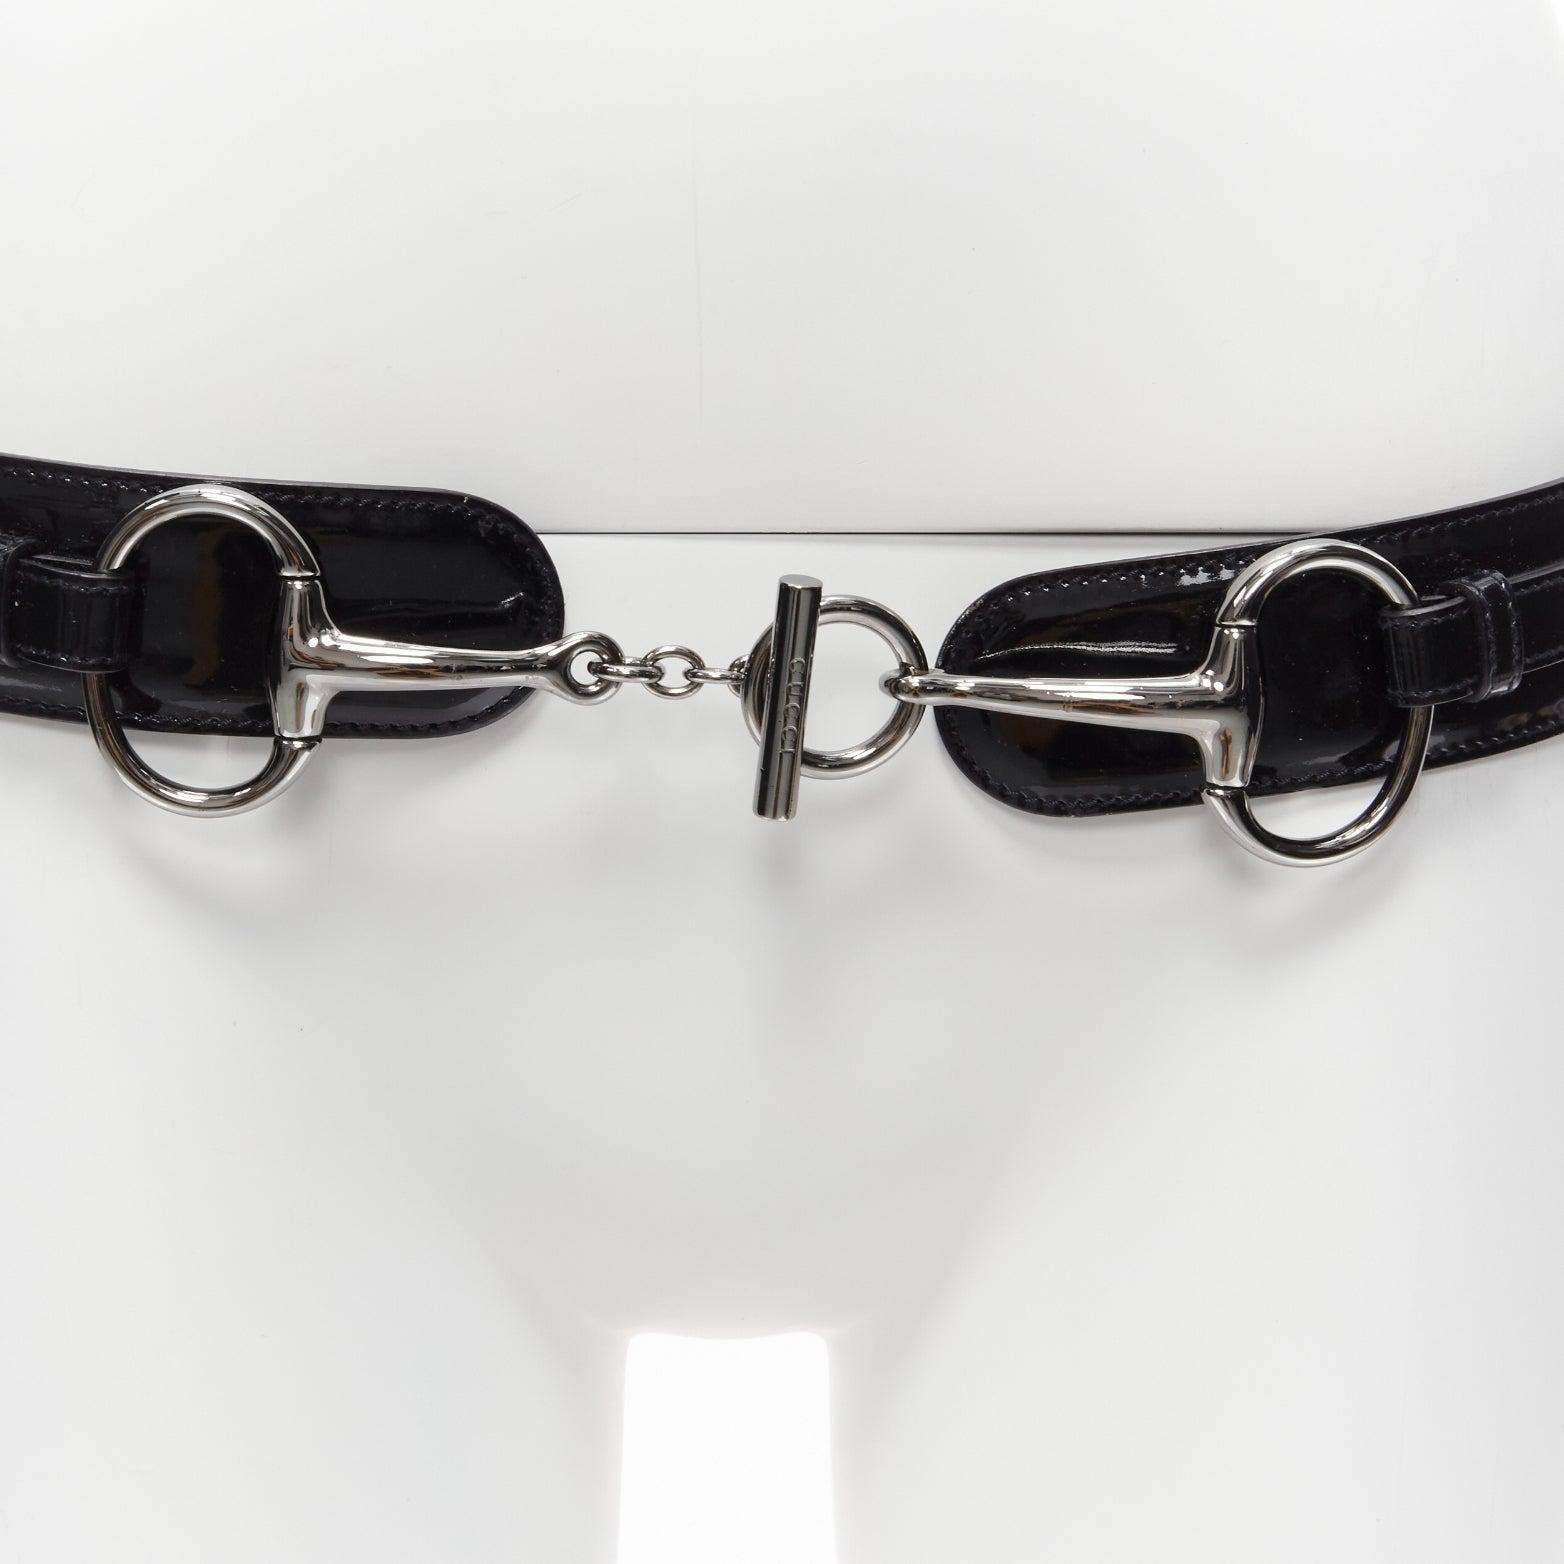 GUCCI Tom Ford Vintage black patent GG logo Horsebit buckle belt
Reference: GIYG/A00277
Brand: Gucci
Designer: Tom Ford
Material: Patent Leather, Metal
Color: Black, Silver
Pattern: Solid
Closure: Loop Through
Lining: Black Leather
Made in: